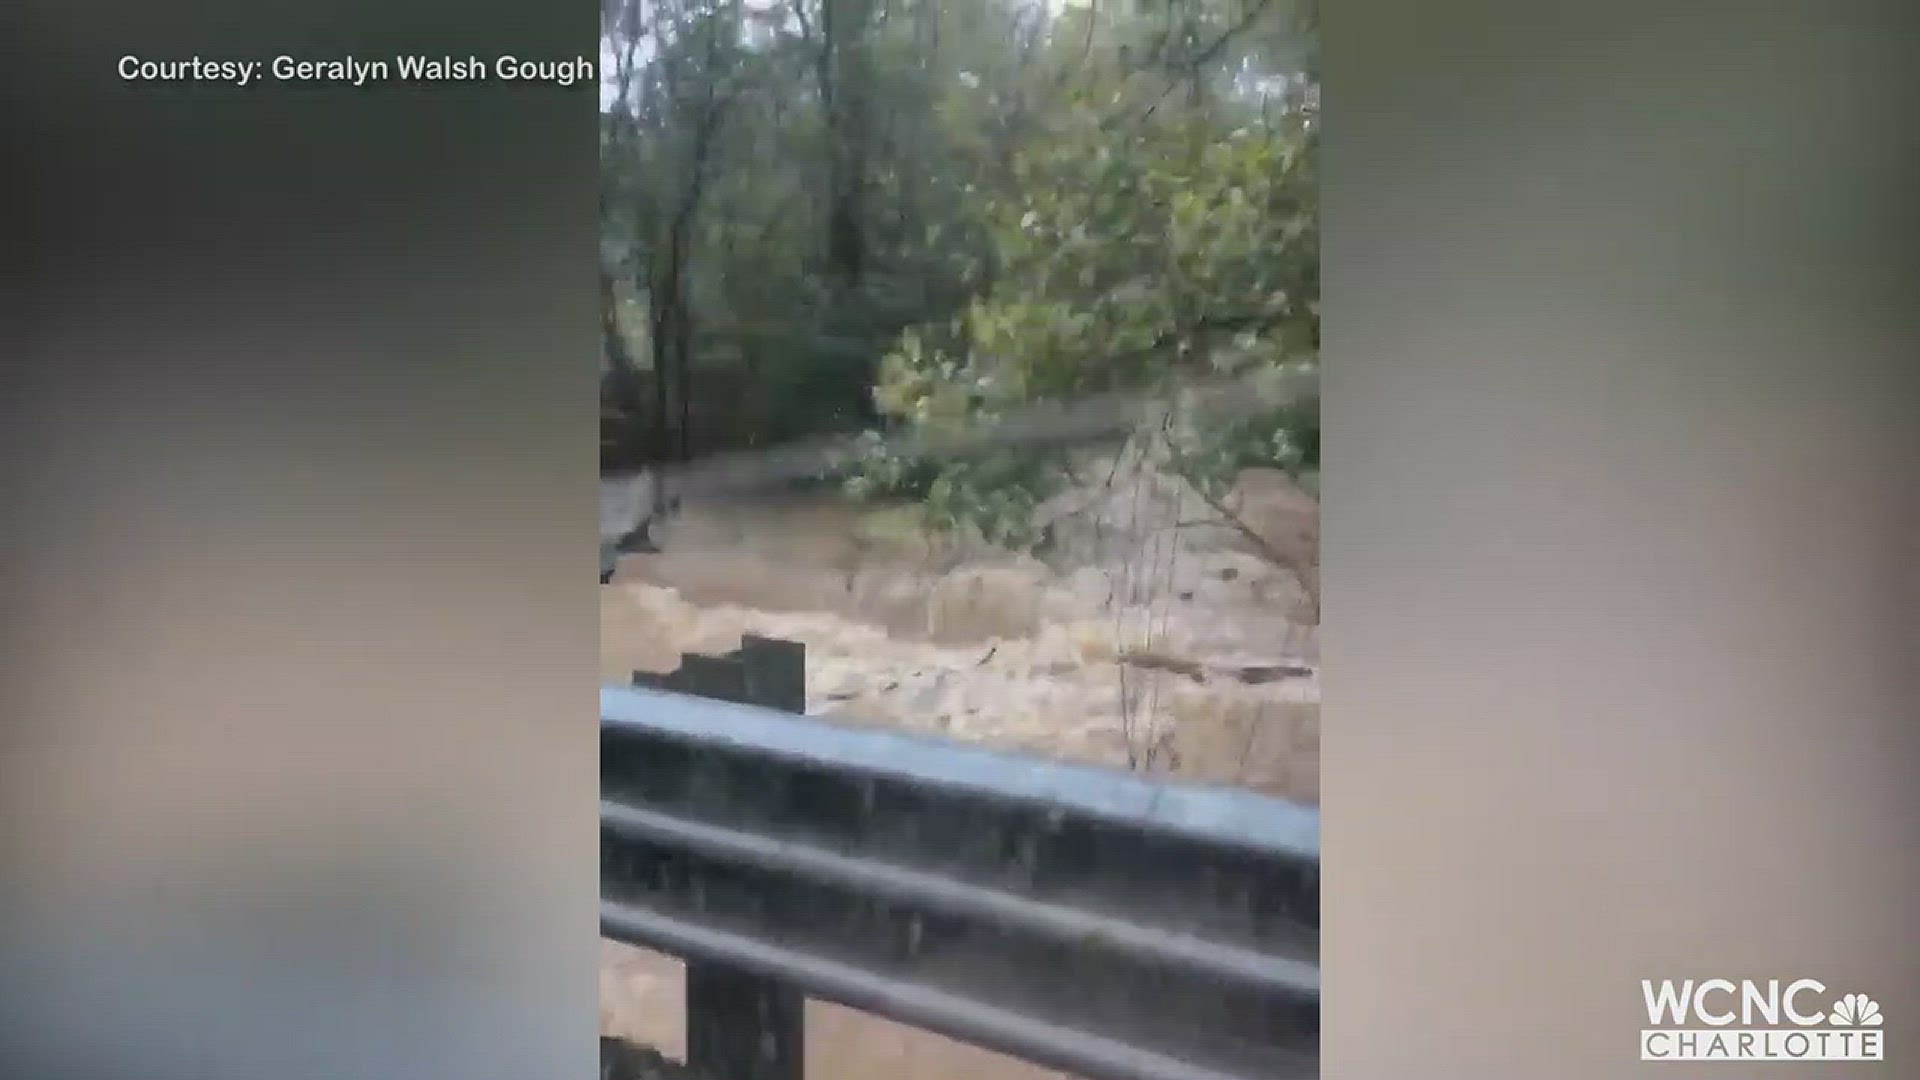 Heavy rain from Tropical Depression Florence flooded creeks and streams across the Charlotte area Sunday morning.